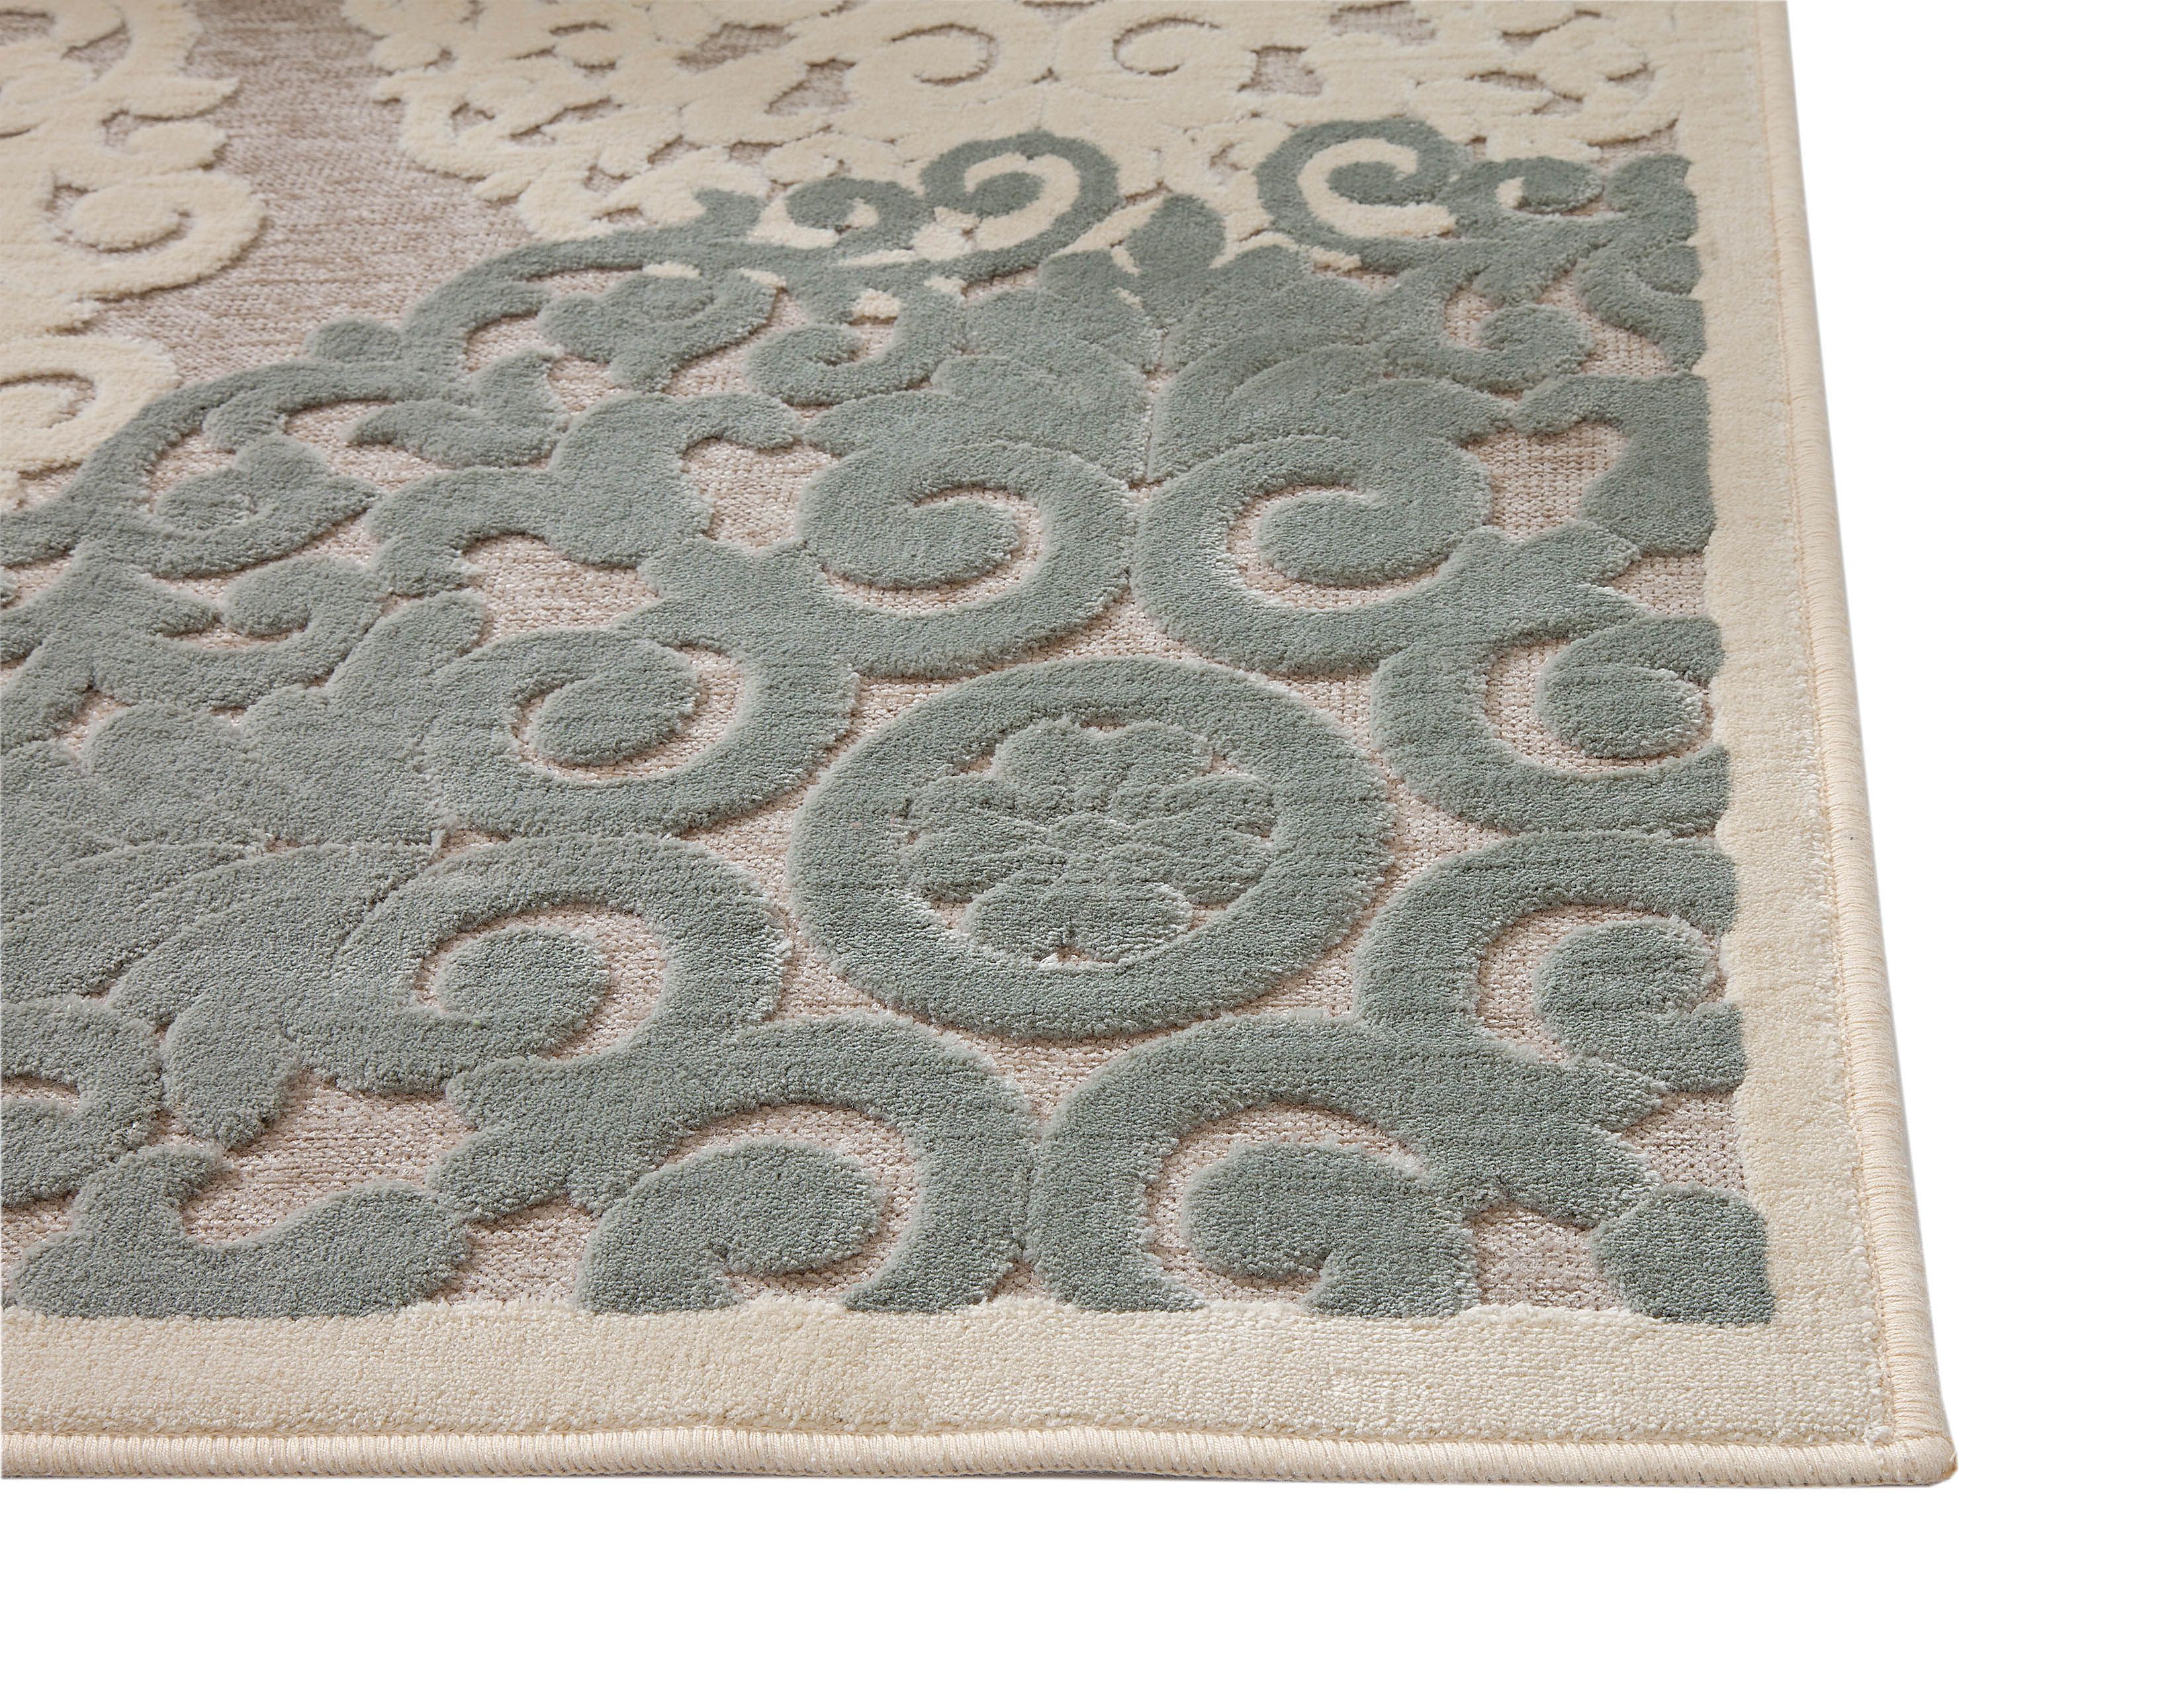 Napa 6025 – Sams International Intended For Napa Indoor Rugs (View 8 of 15)